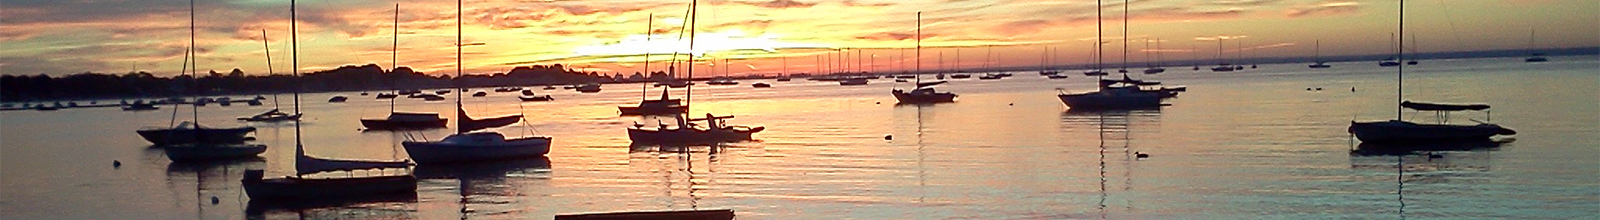 Sunsetting with boats in the water